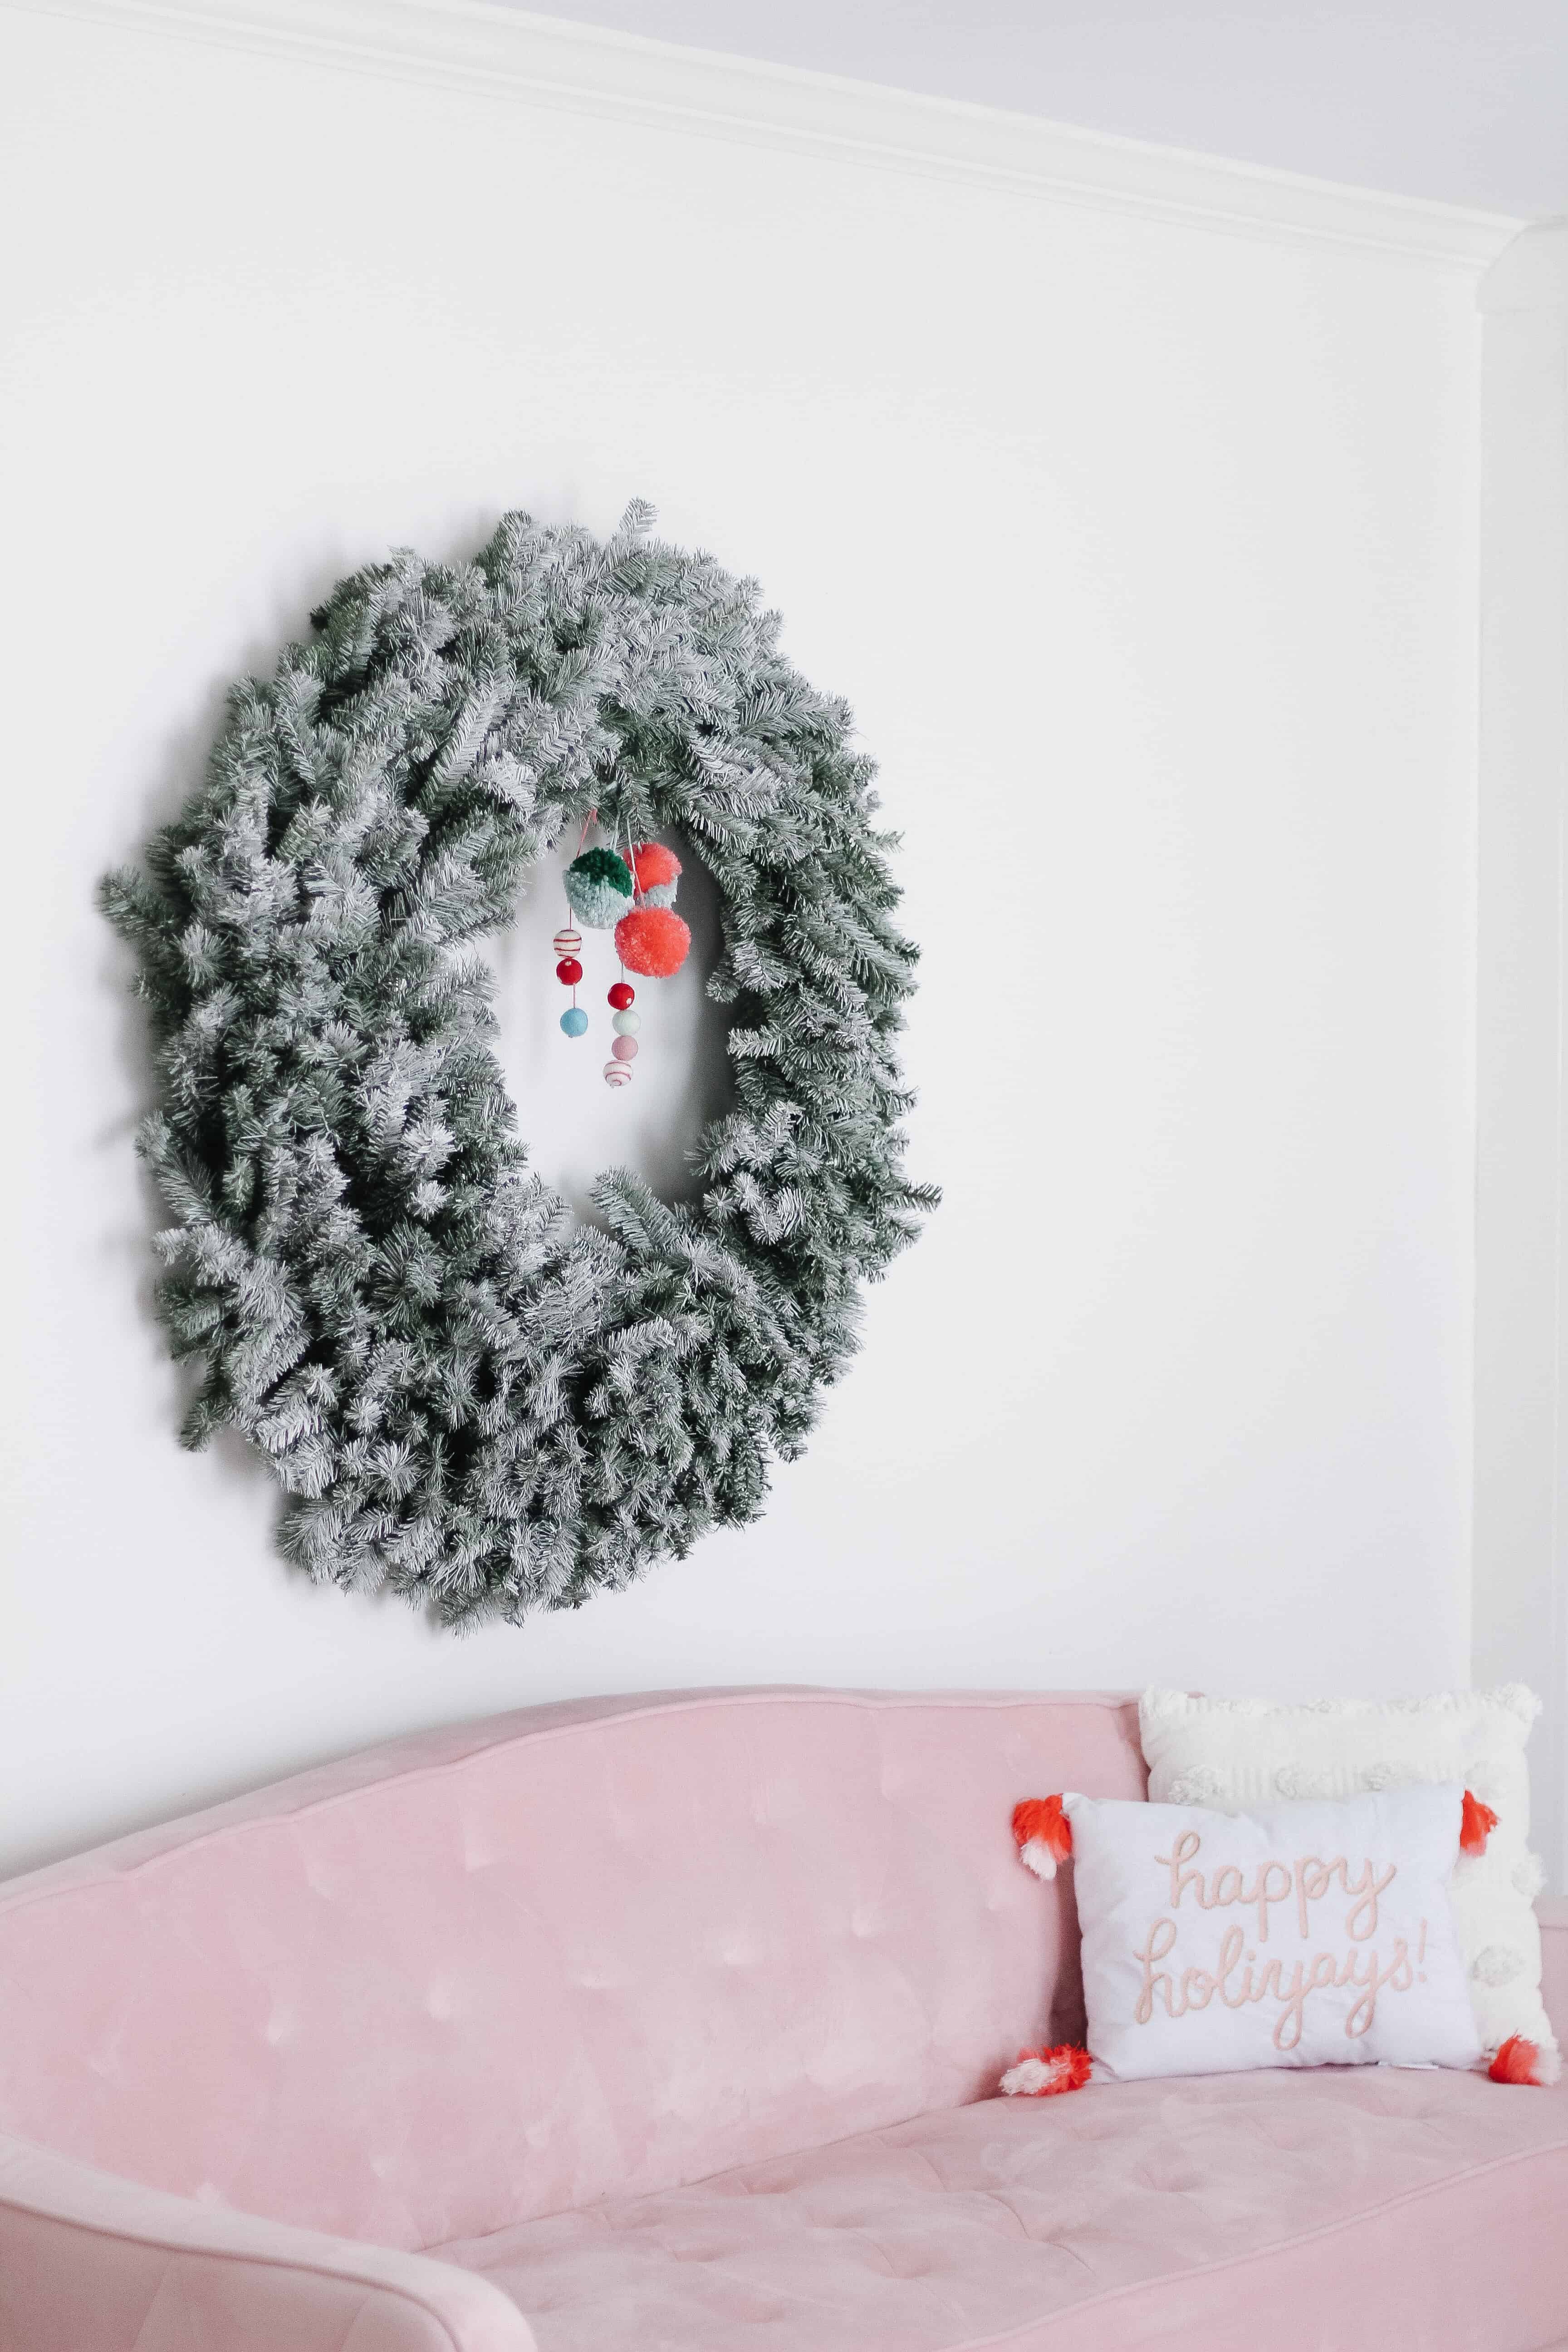 Large Flocked Wreath over Pink couch